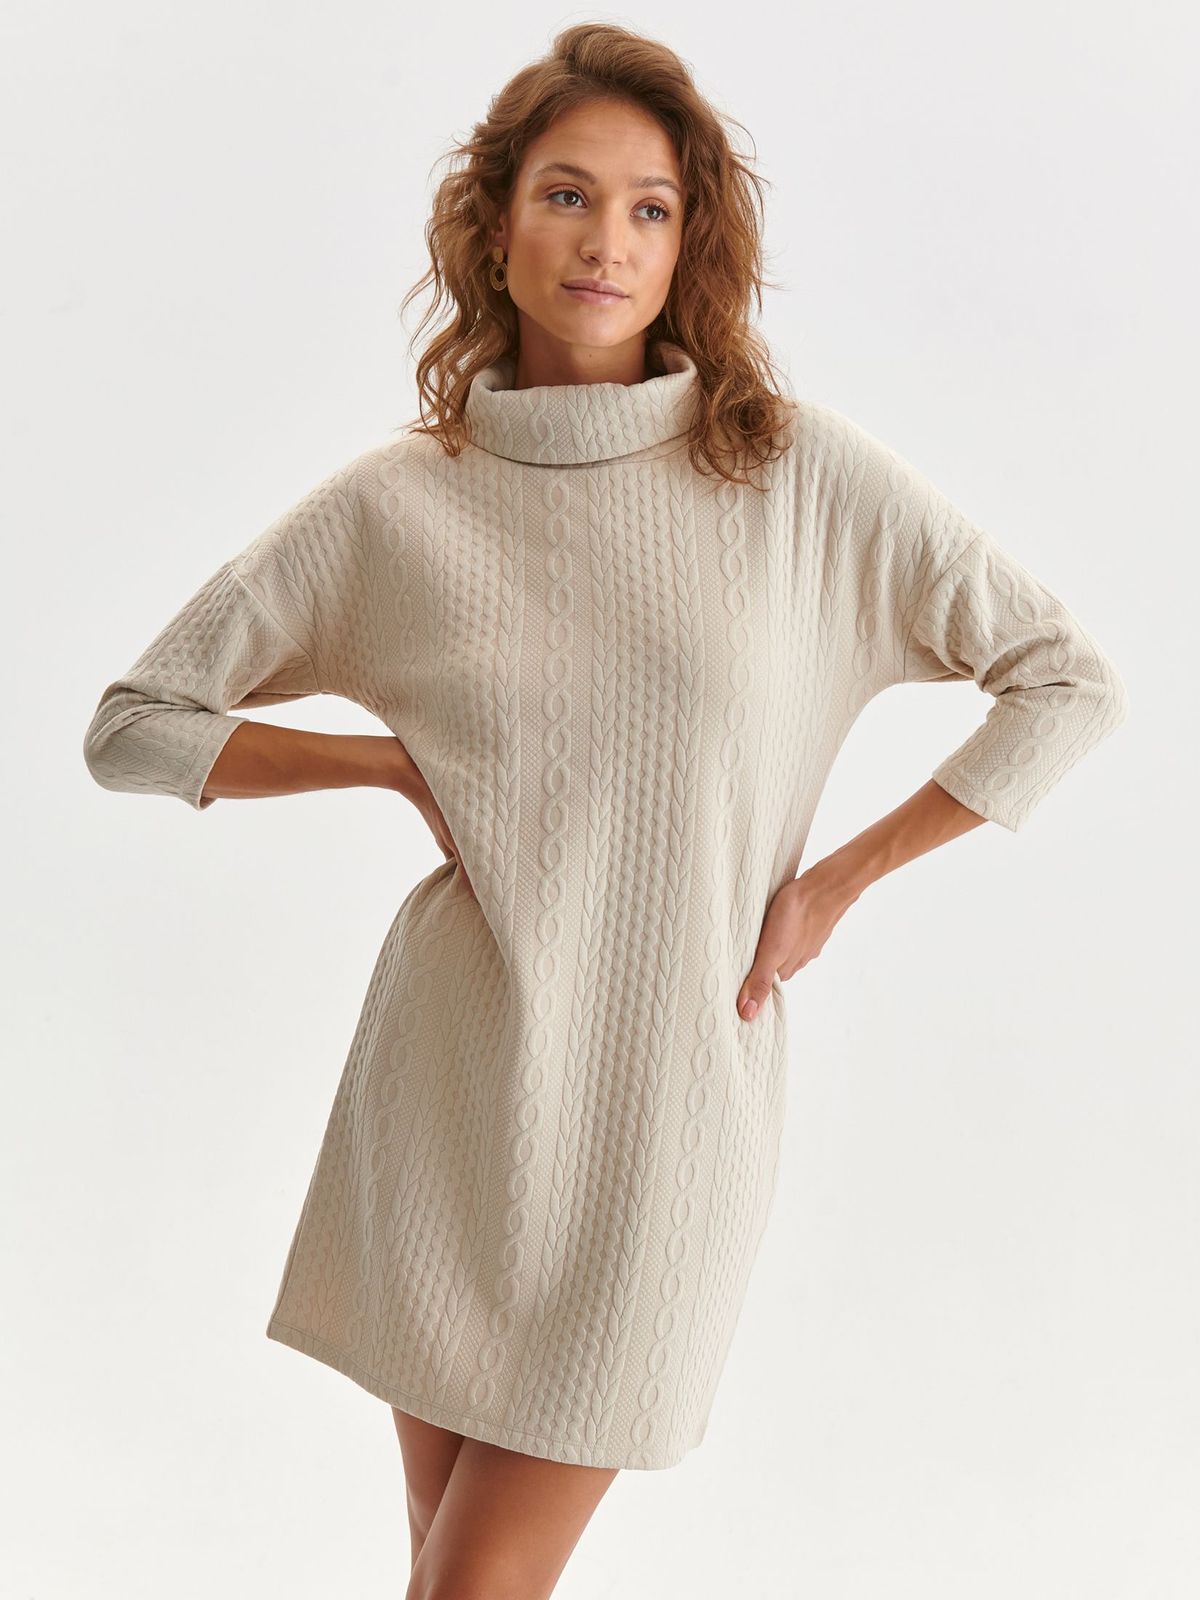 Cream dress knitted with turtle neck loose fit